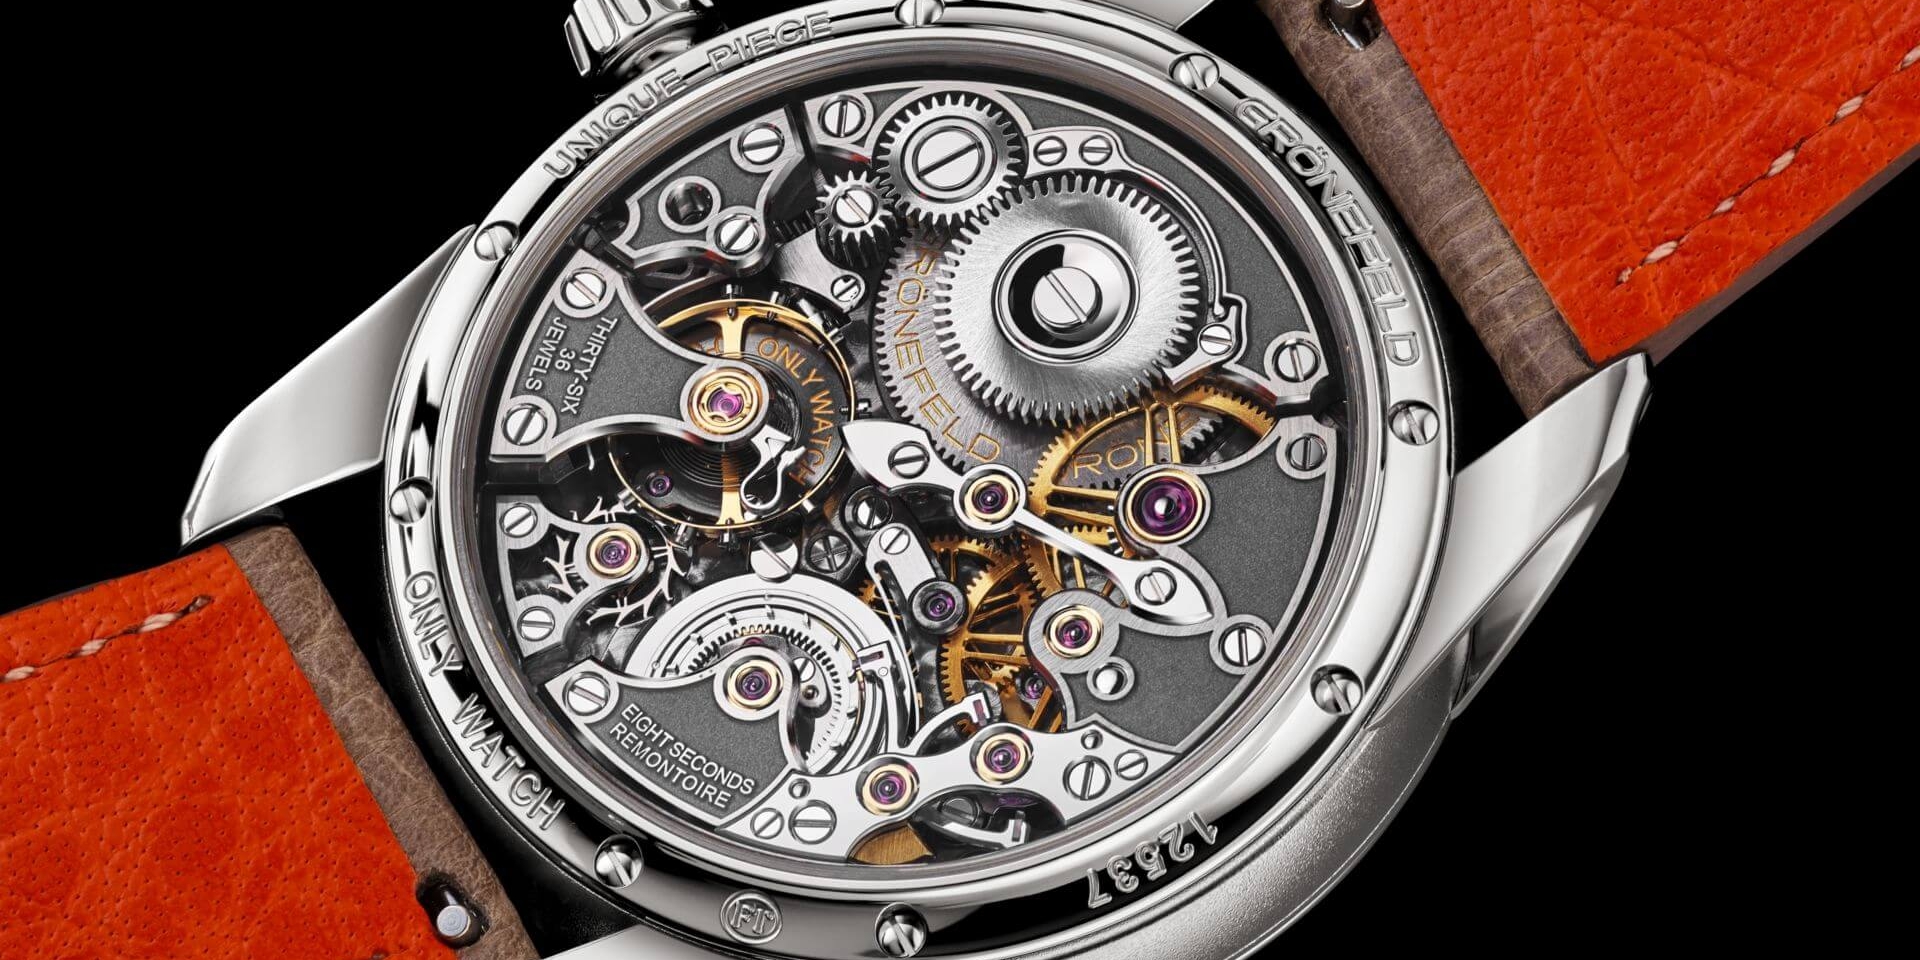 Pretty from within and without: 3 examples of non-Swiss haute horlogerie